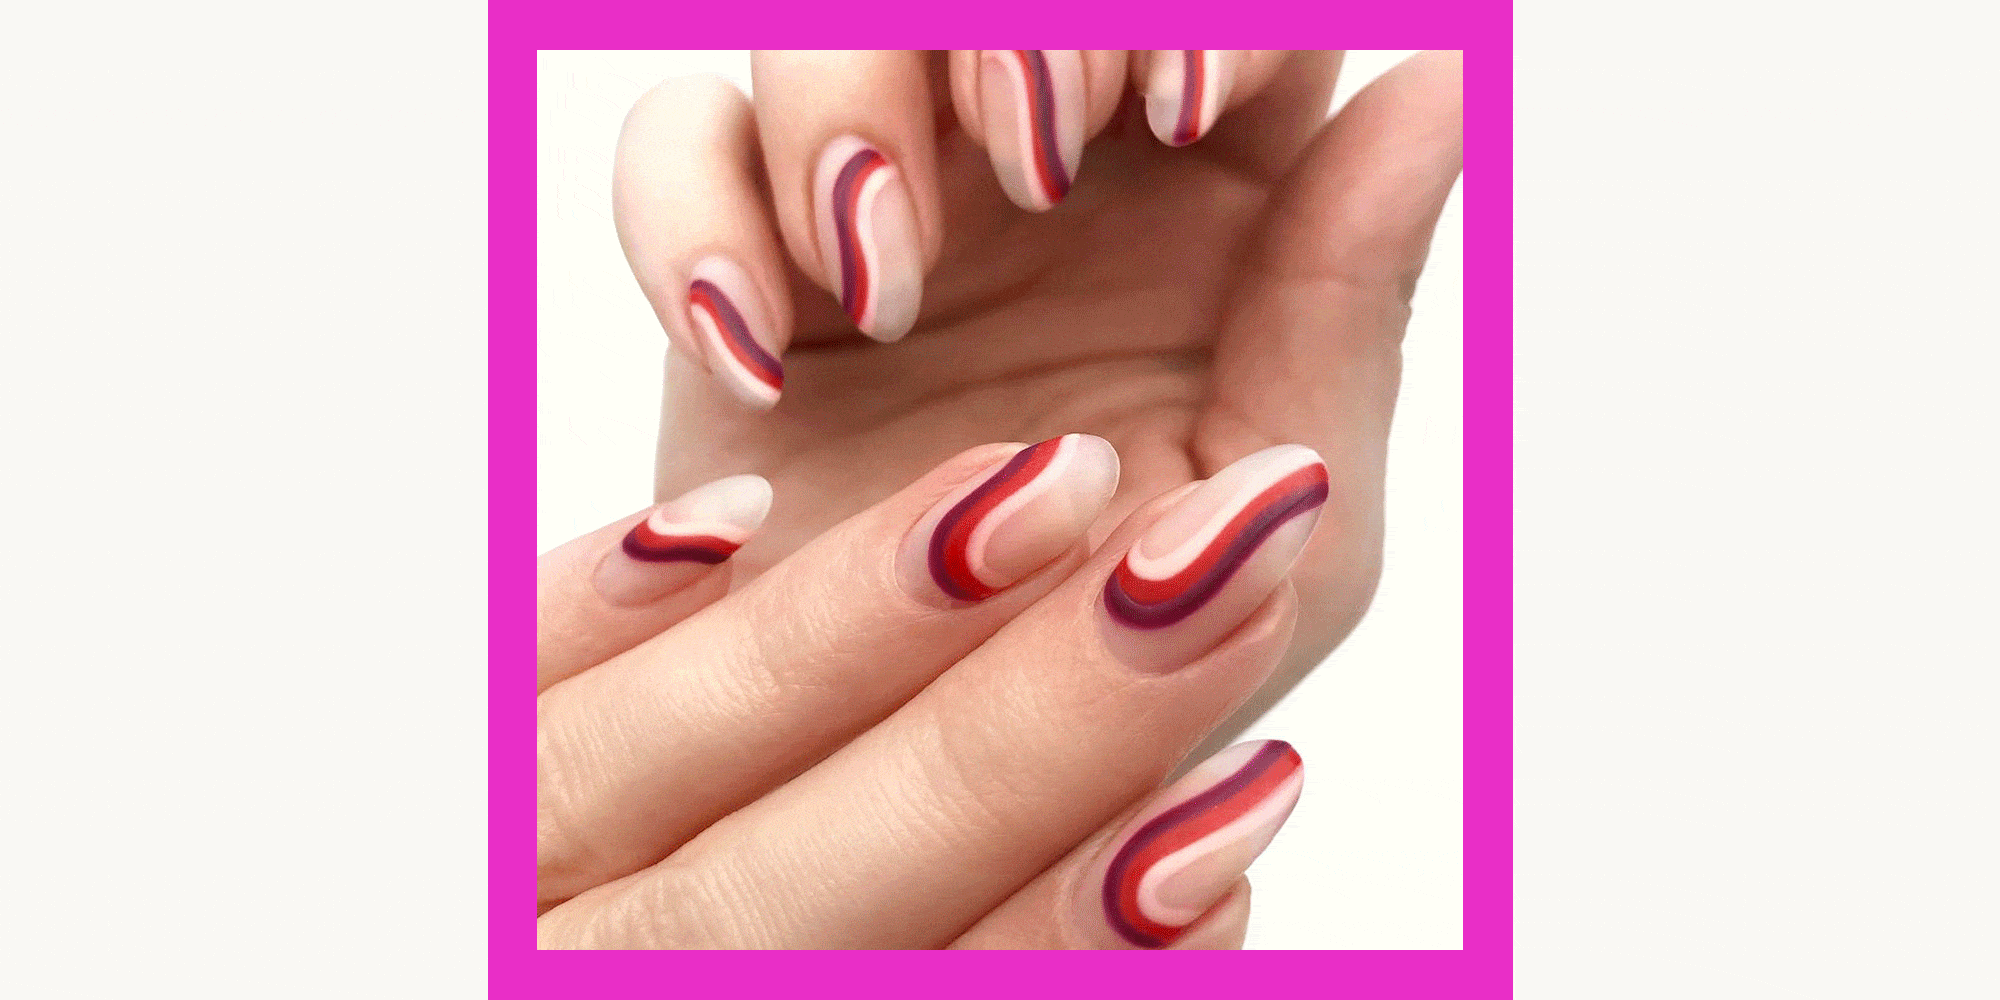 2. "25 Valentine's Day Nail Art Ideas Working as a Wonderful Reminder of ... - wide 2